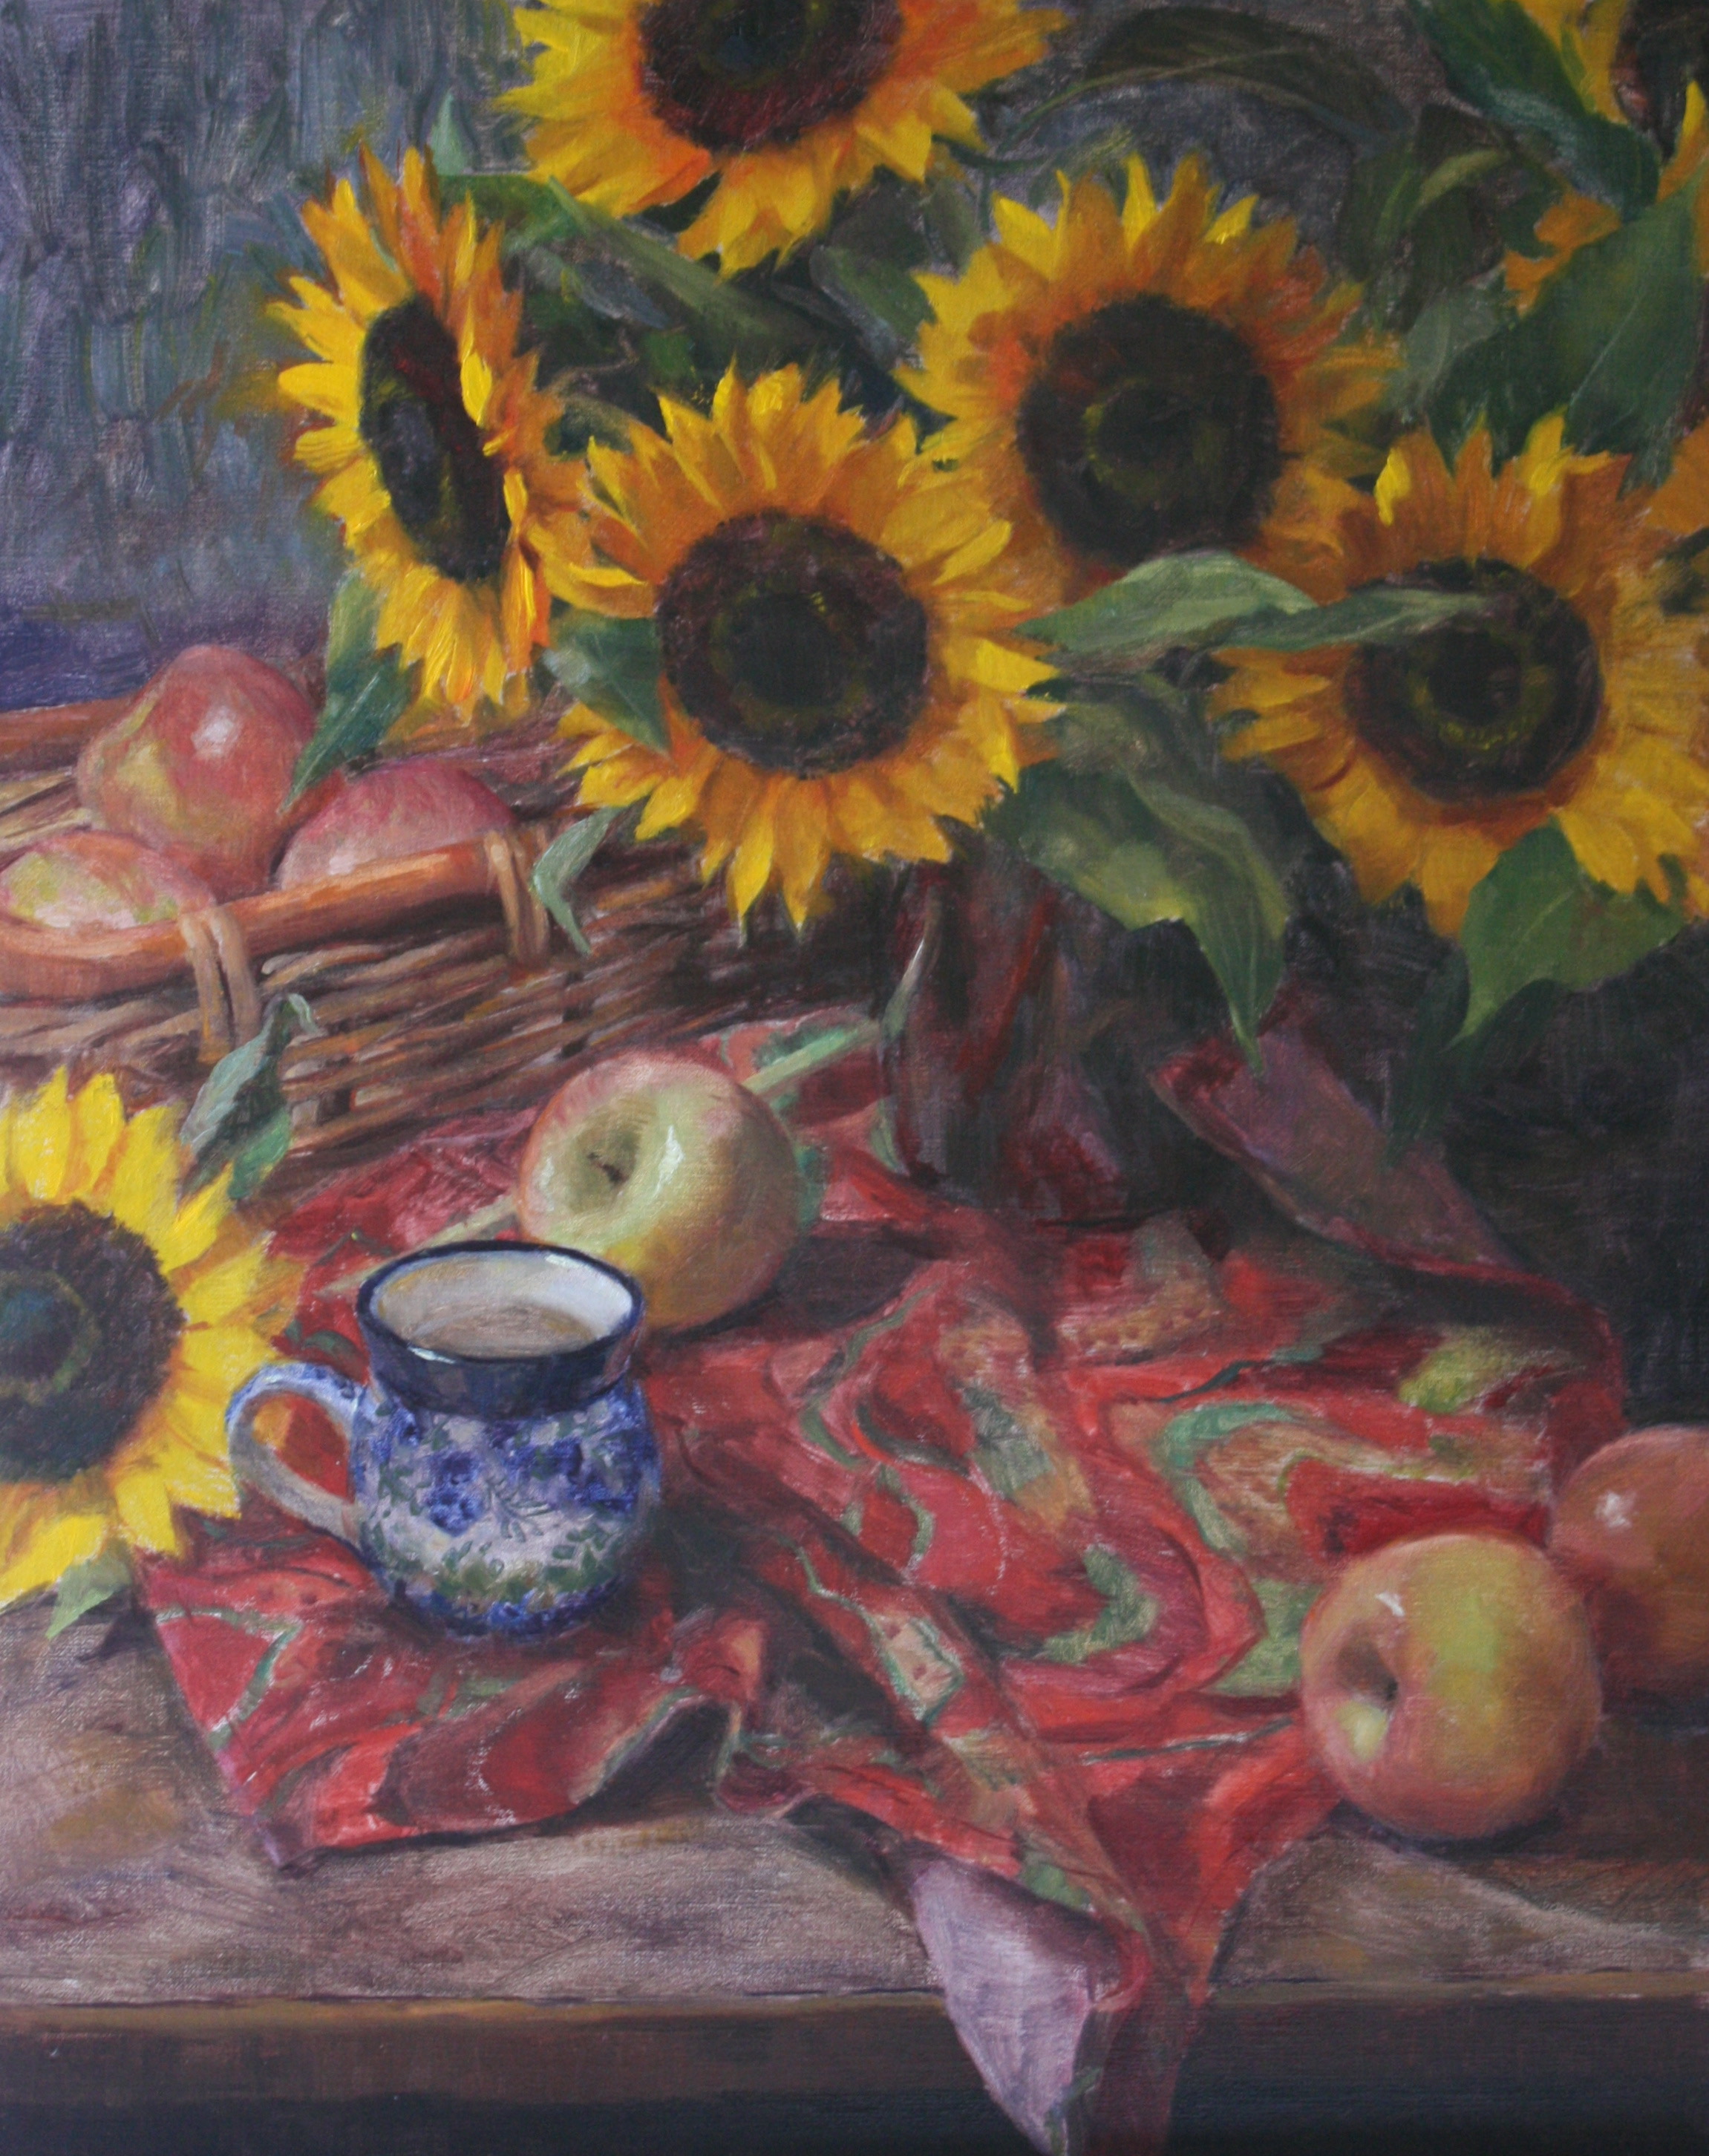 "Sunflowers and Apples" 16x20 $850